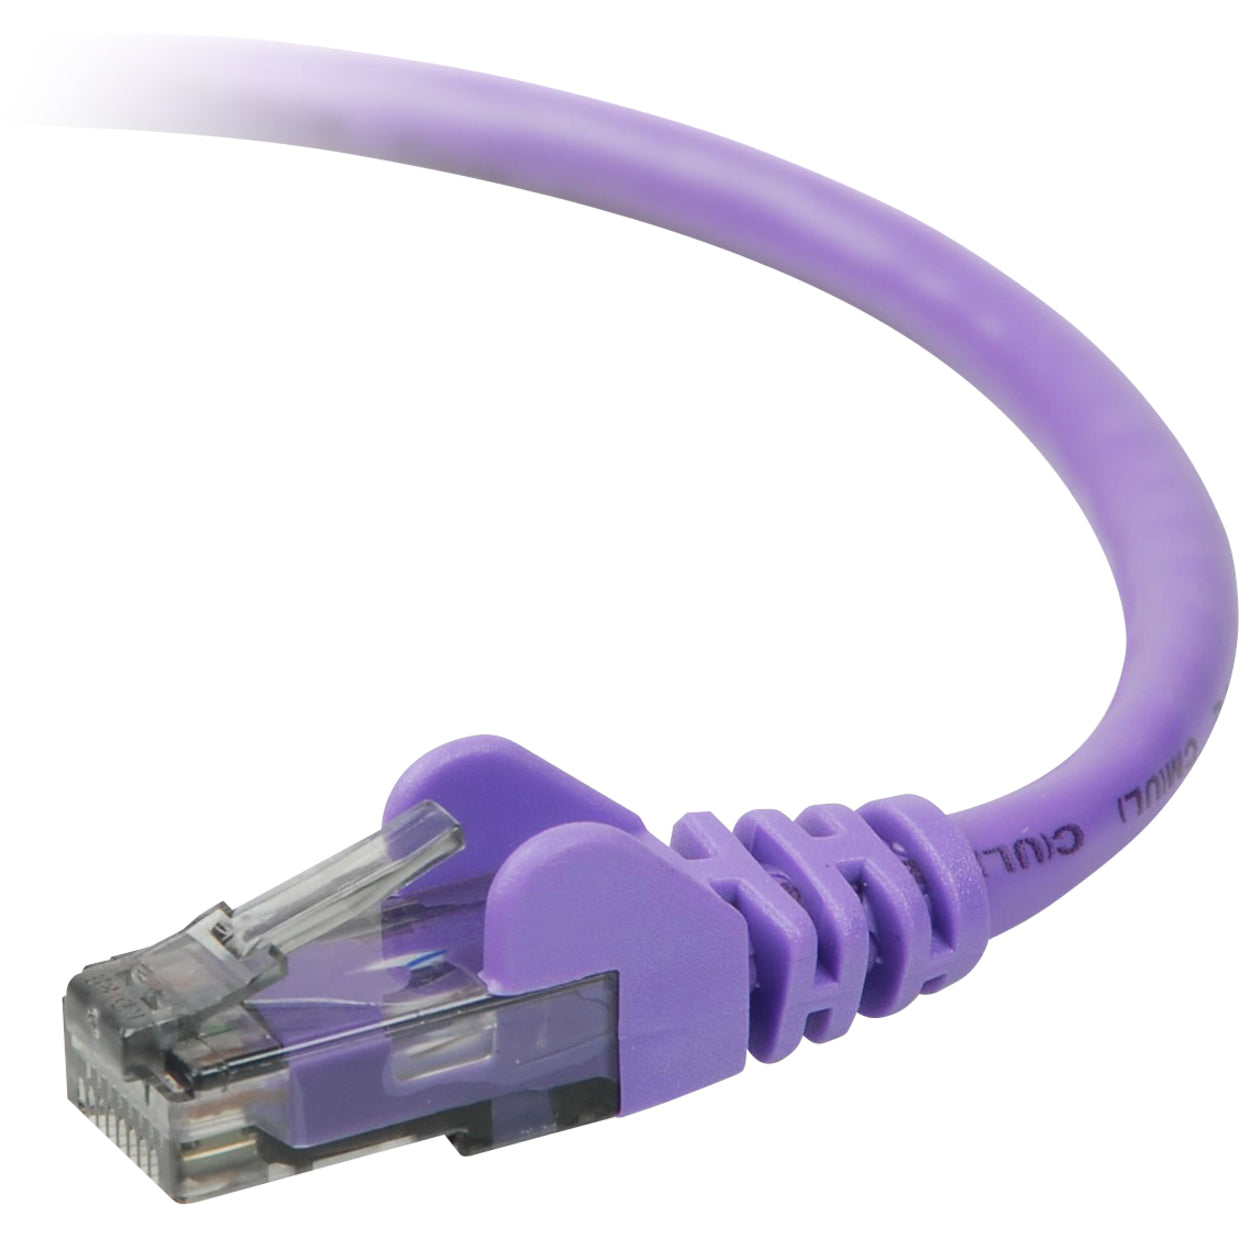 Belkin A3L980-50-PUR-S RJ45 Category 6 Snagless Patch Cable, 50 ft, Molded, Copper, Purple